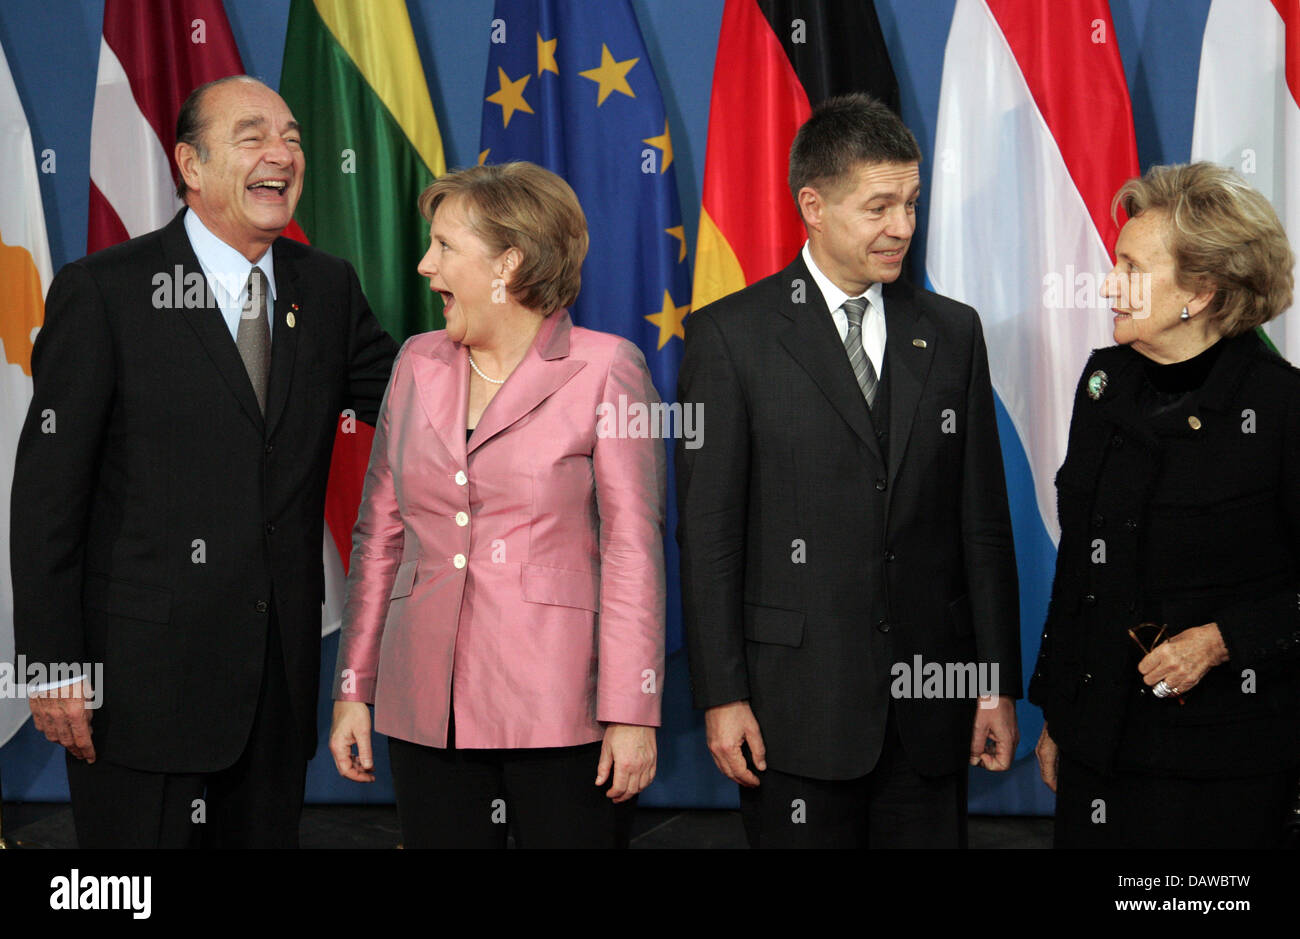 German Chancellor Angela Merkel (2nd from L) and her husband Joachim Sauer (3rd from L) welcome French President Jacques Chirac (L) and his wife Bernadette Chodron de Courcel at the philharmonics in Berlin, Saturday, 24 March 2007. The 50th anniversary of the Treaty of Rome is celebrated this weekend in Berlin. EU heads of state and heads of government gather for an informal meetin Stock Photo